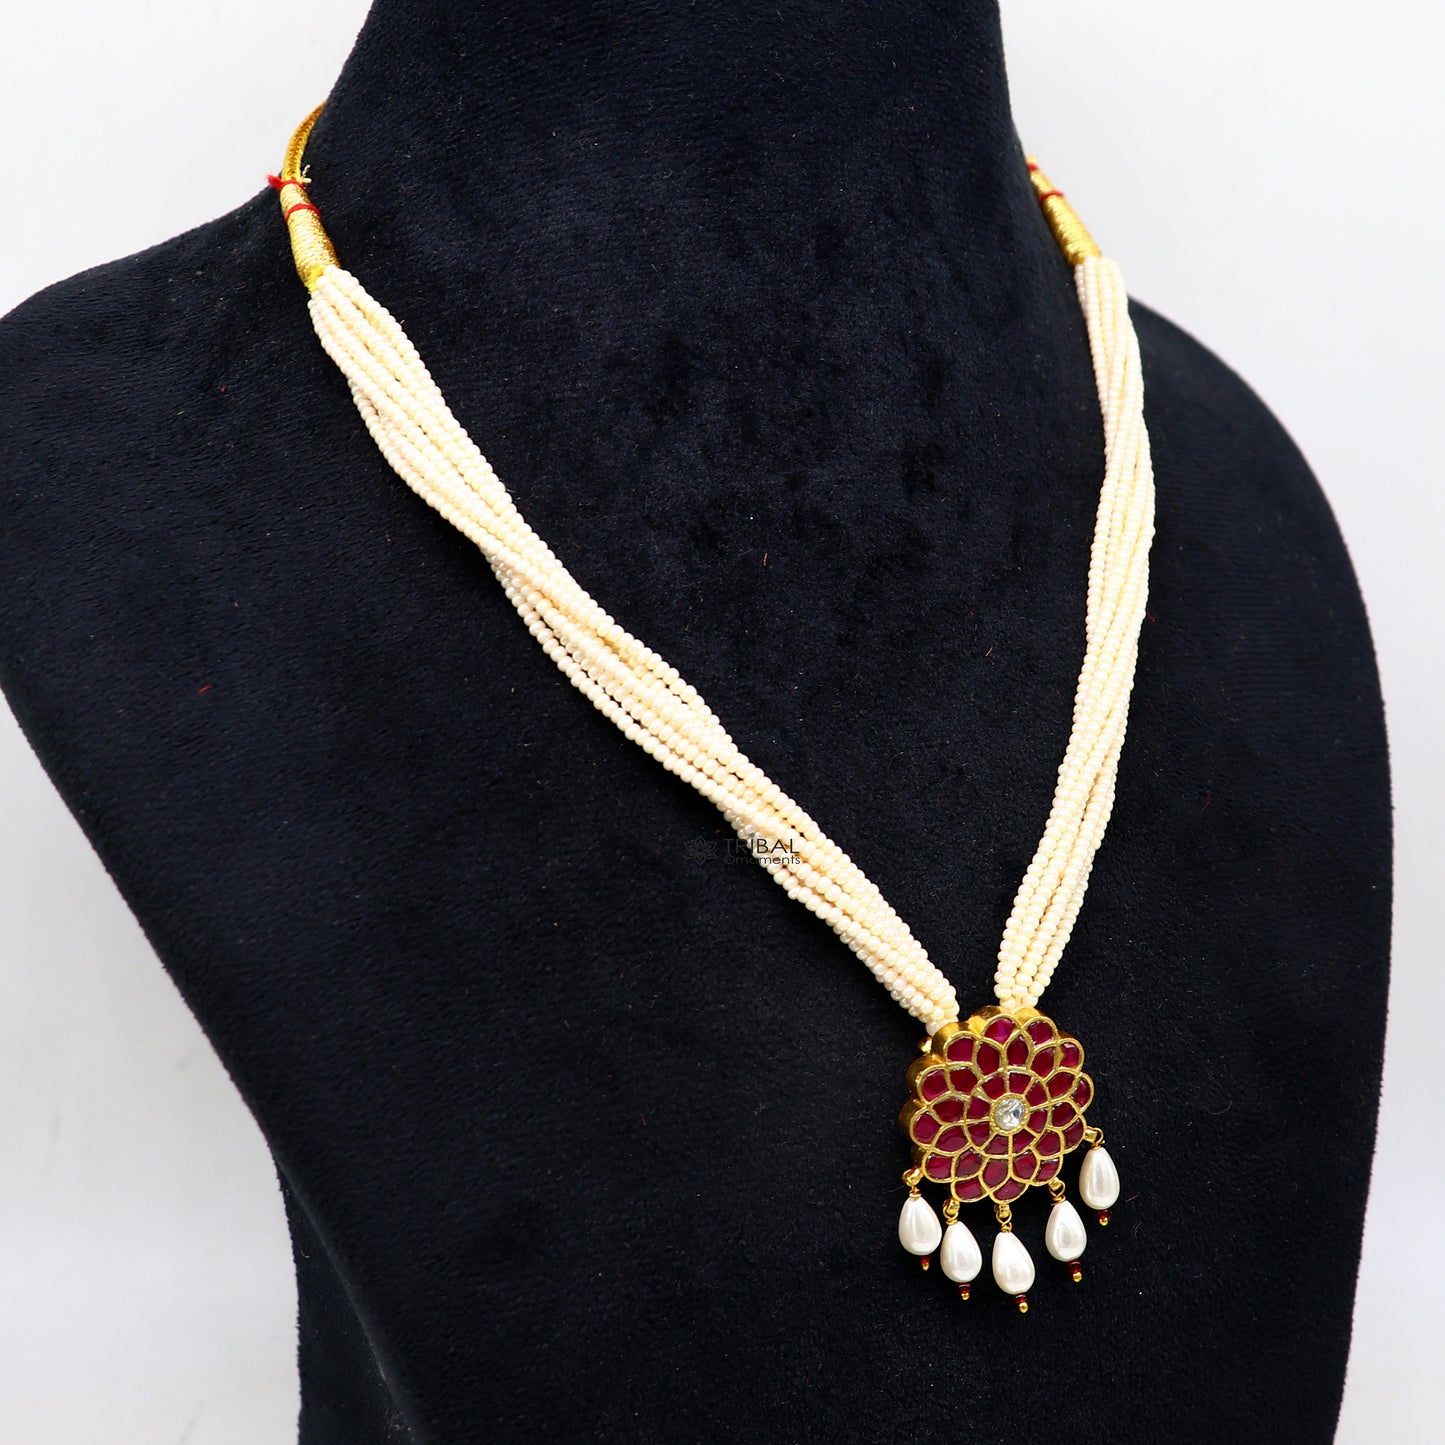 92.5 sterling silver Fabulous charming kundan work red stone flower pendant trendy necklace with multiline pearls strings jewellery set617 - TRIBAL ORNAMENTS